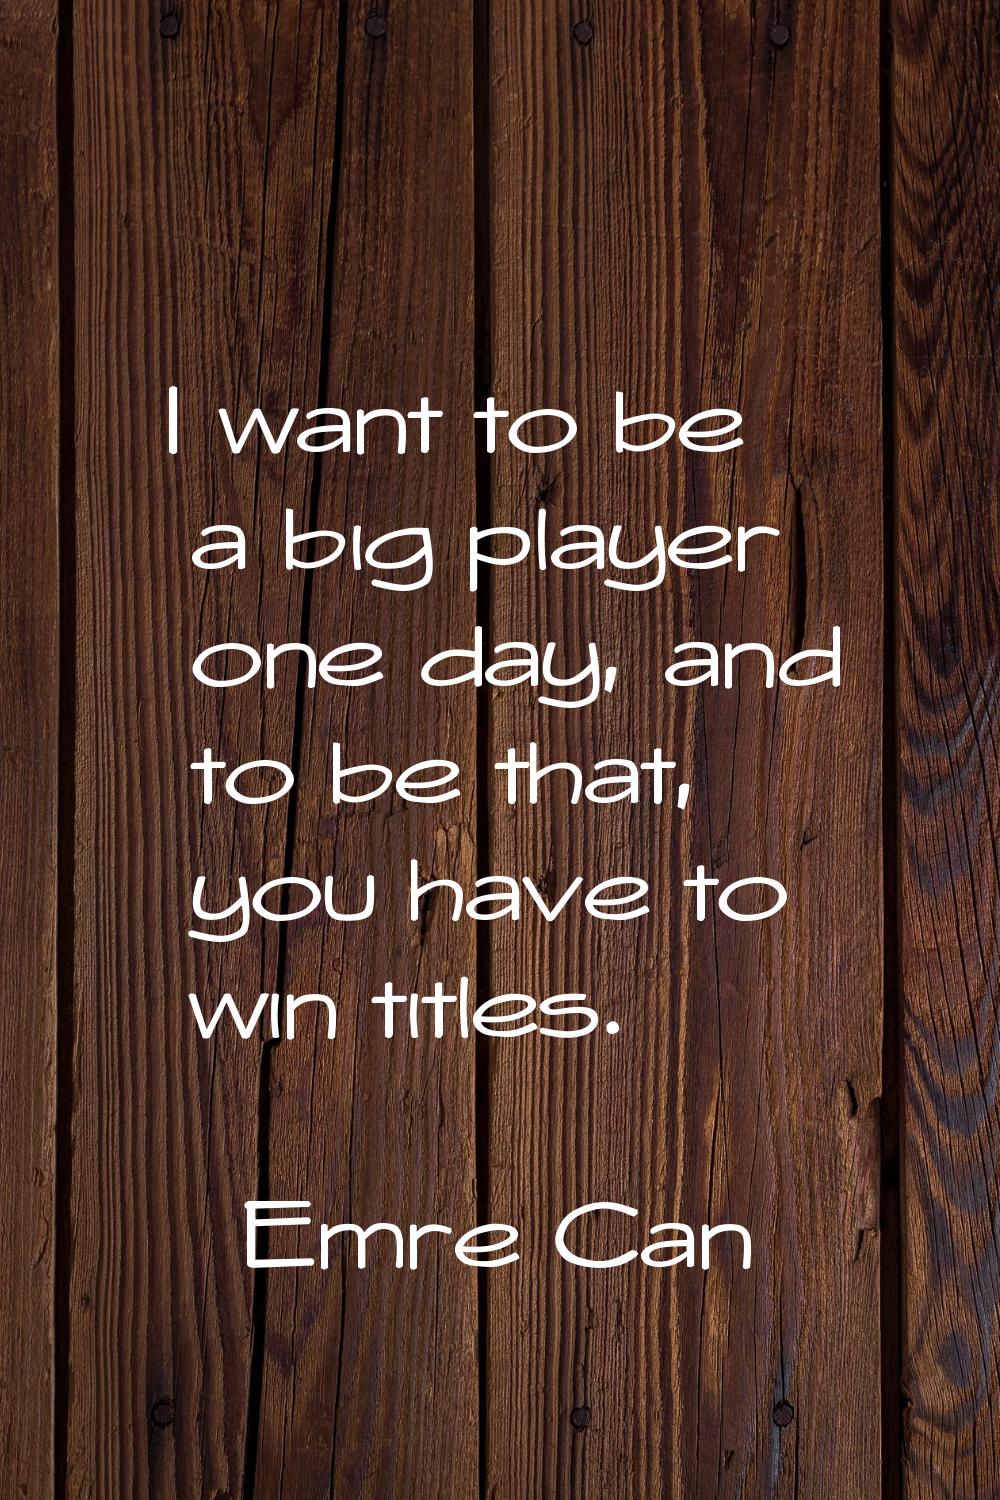 I want to be a big player one day, and to be that, you have to win titles.